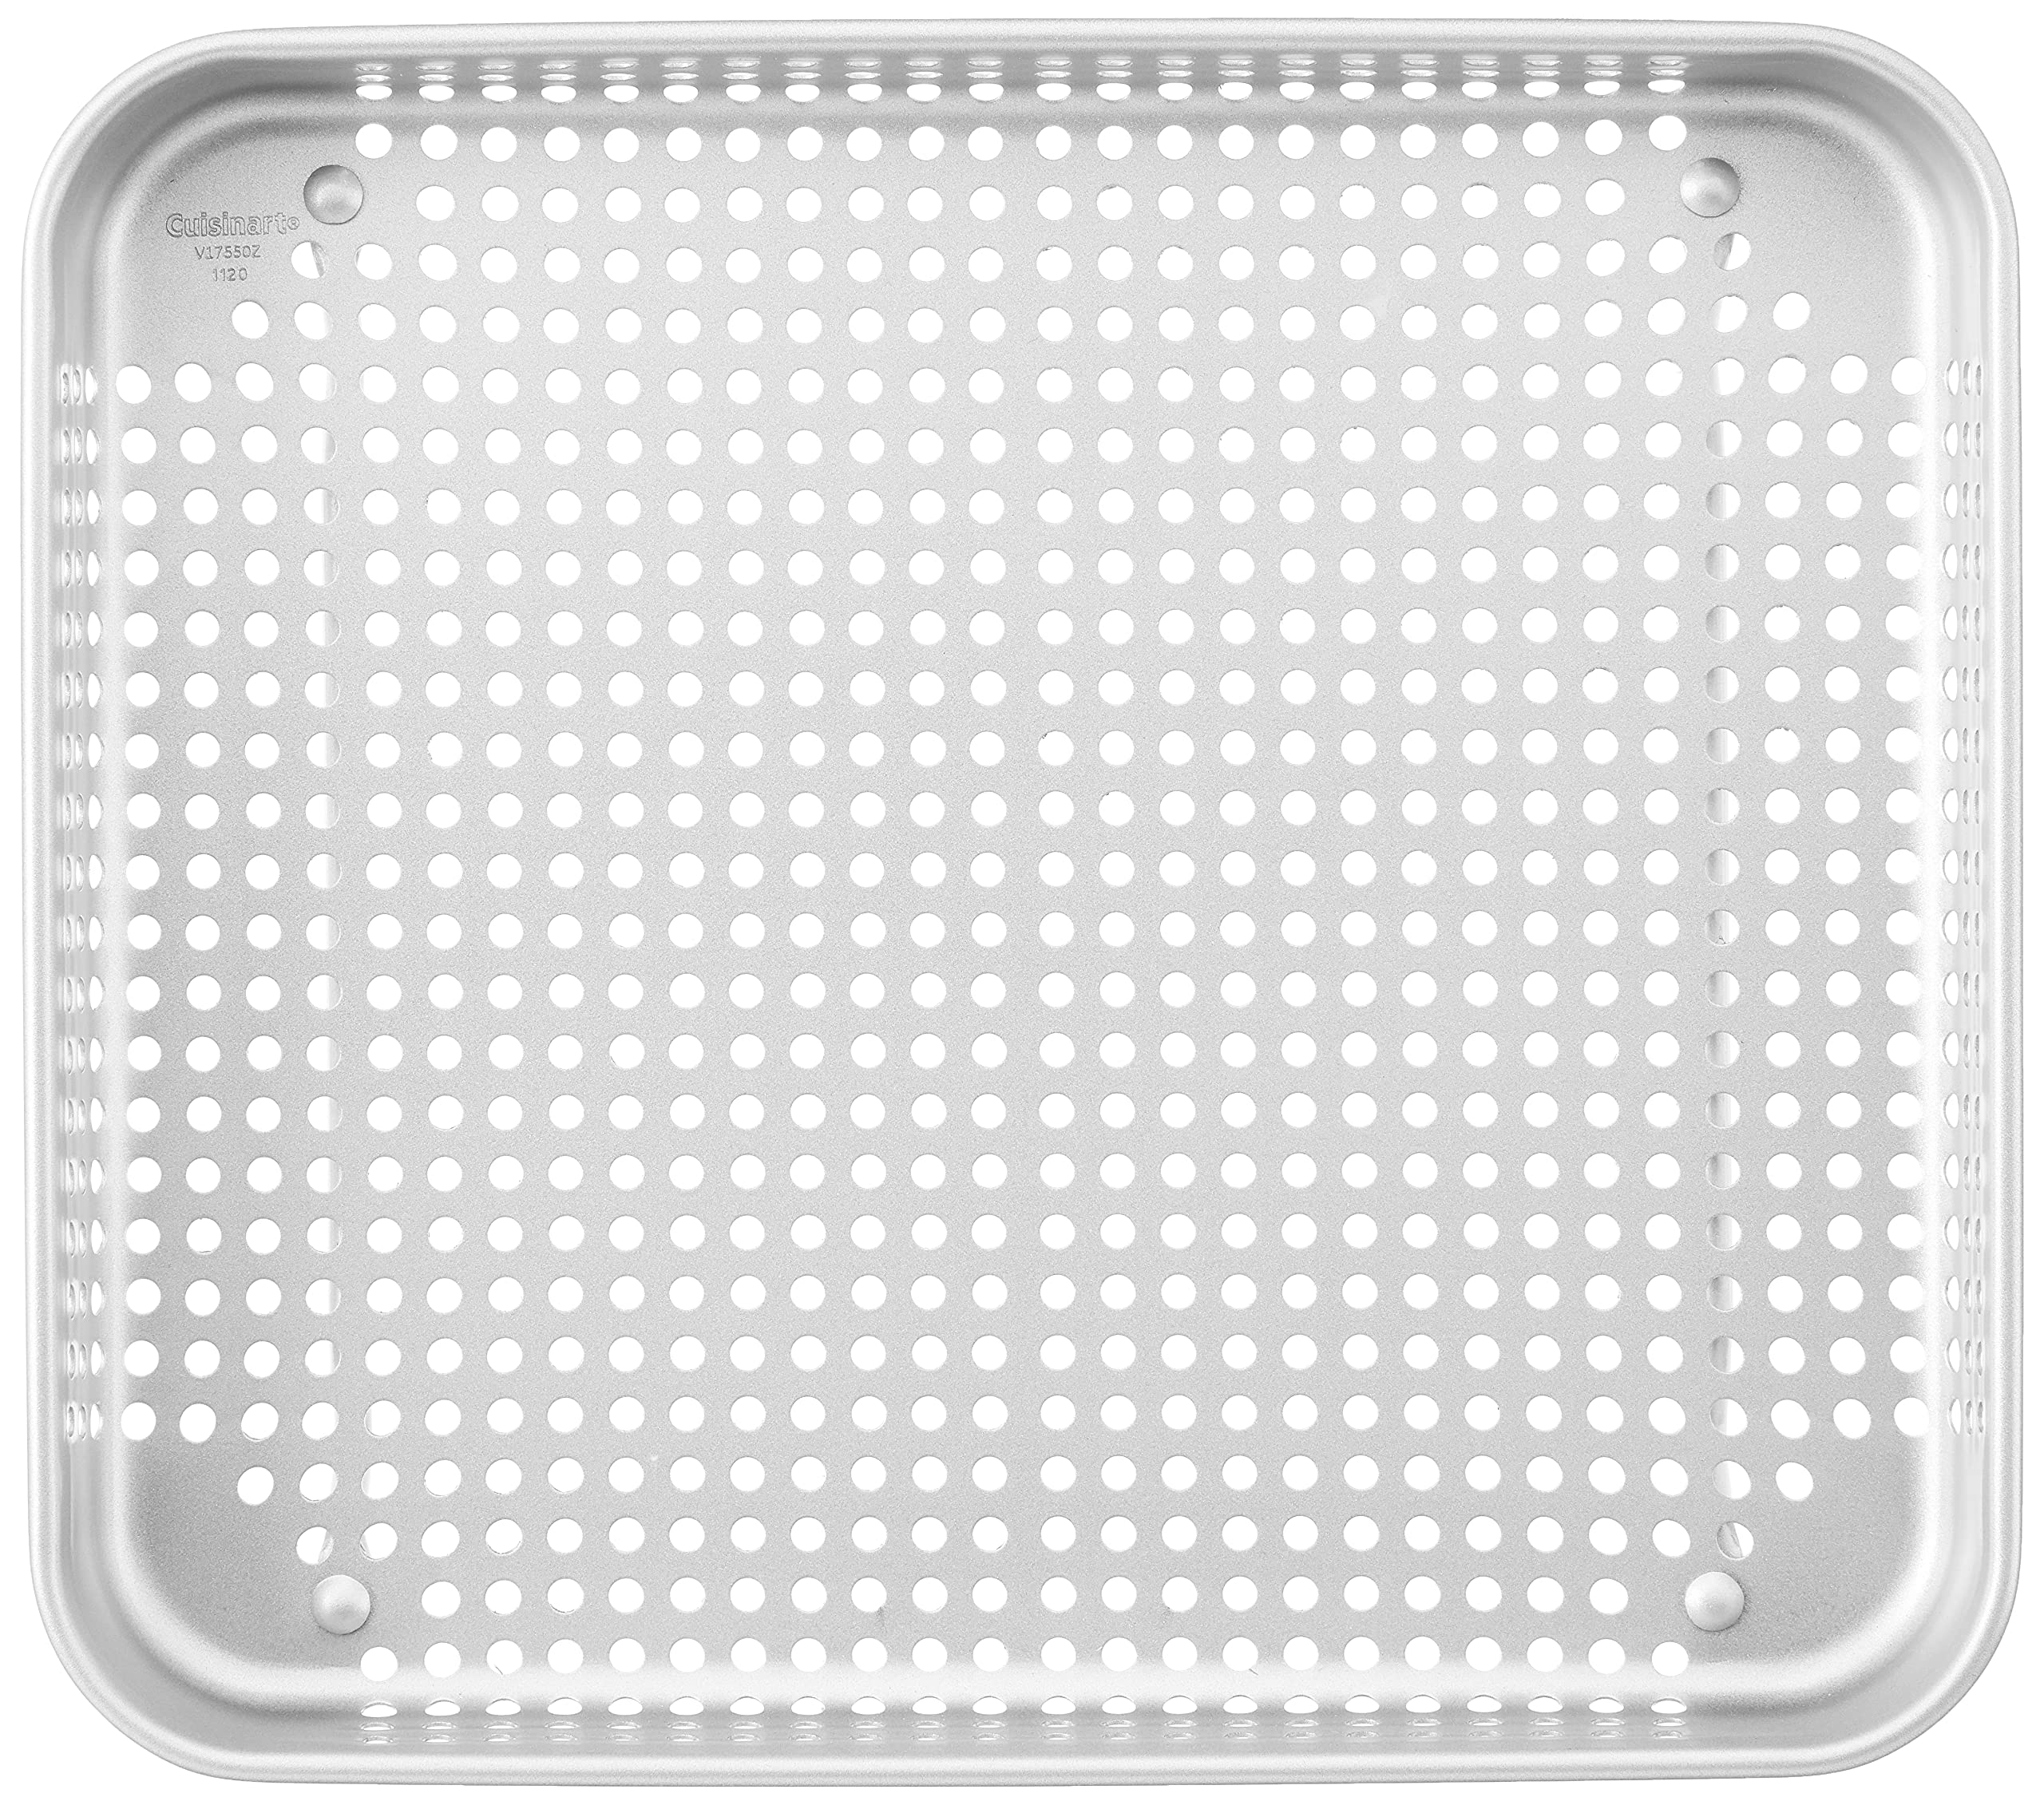 Cuisinart ANS-TOA2528 Non-Stick Airfryer Basket & AMB-TOBCS Toaster Oven Baking Pan, Silver, 11.2 (l) x 10.7 (w) x 0.8 (h) inches